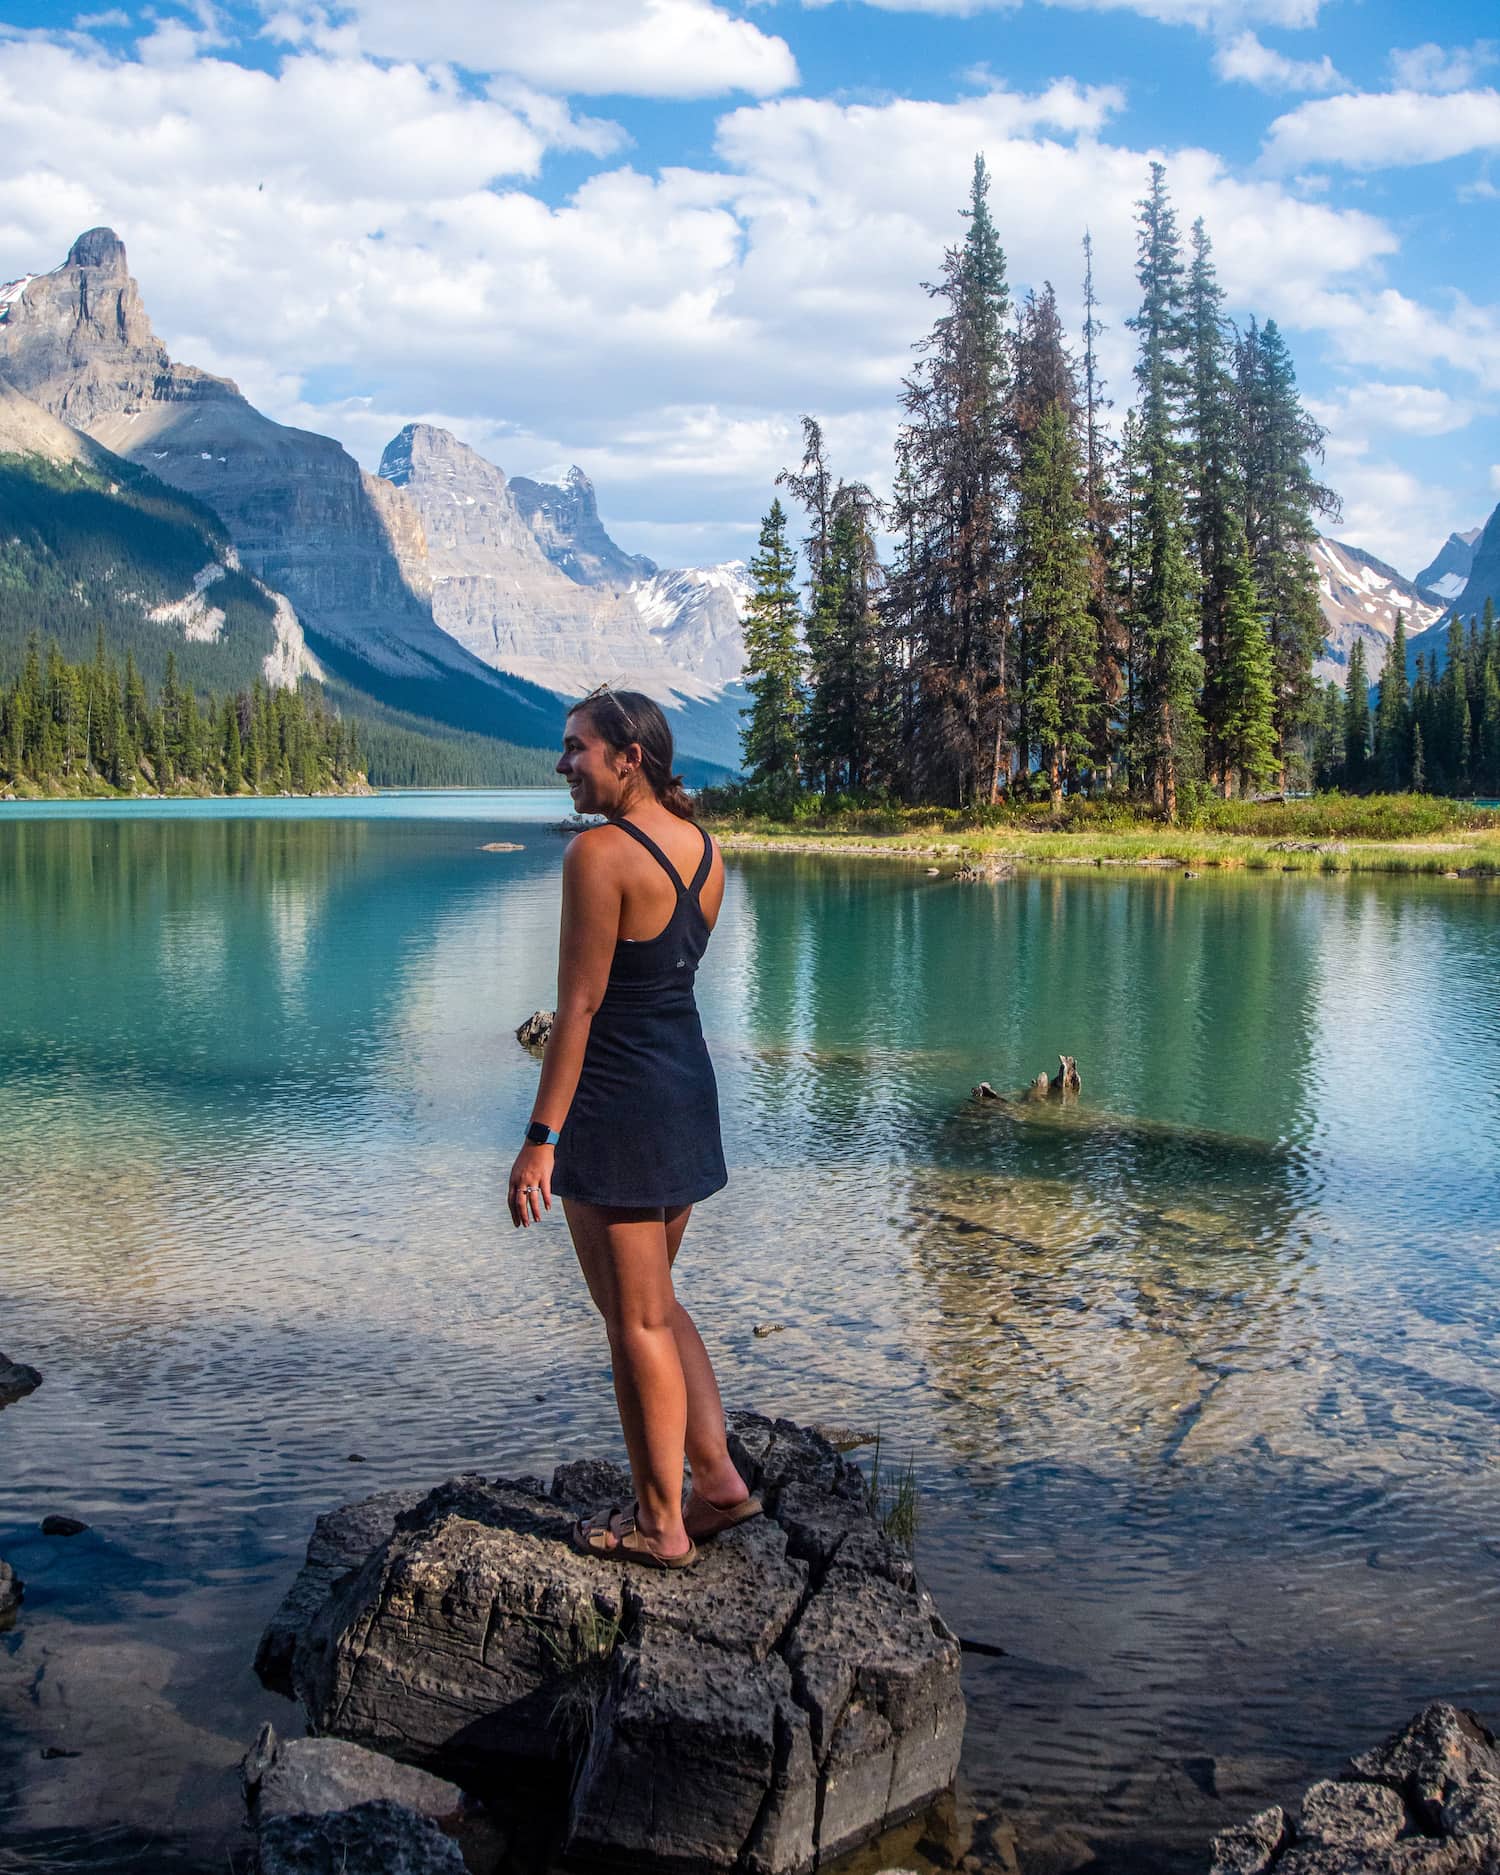 girl looking out at landscape of Spirit Island in Jasper National Park, mountains and island behind her with blue lake